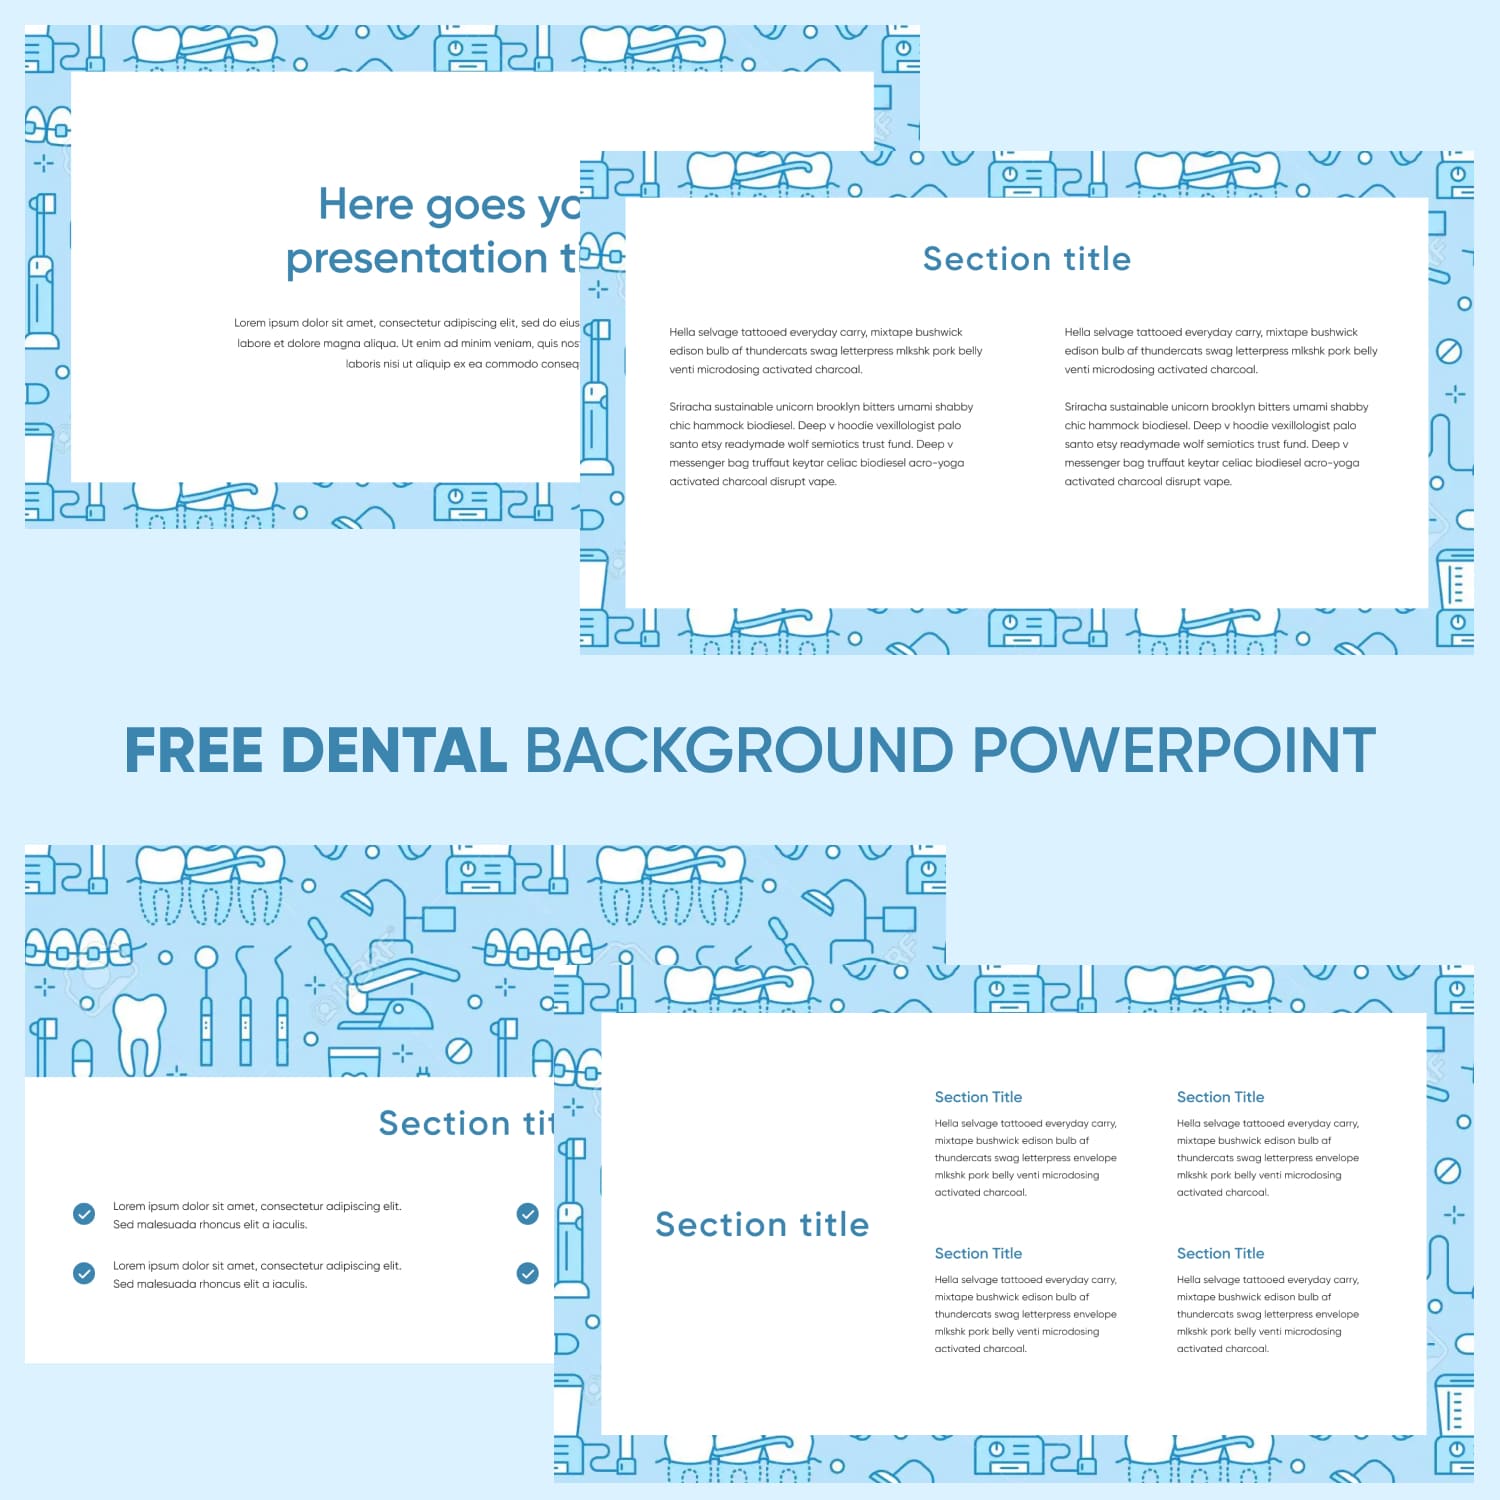 Preview Dental Background Powerpoint.